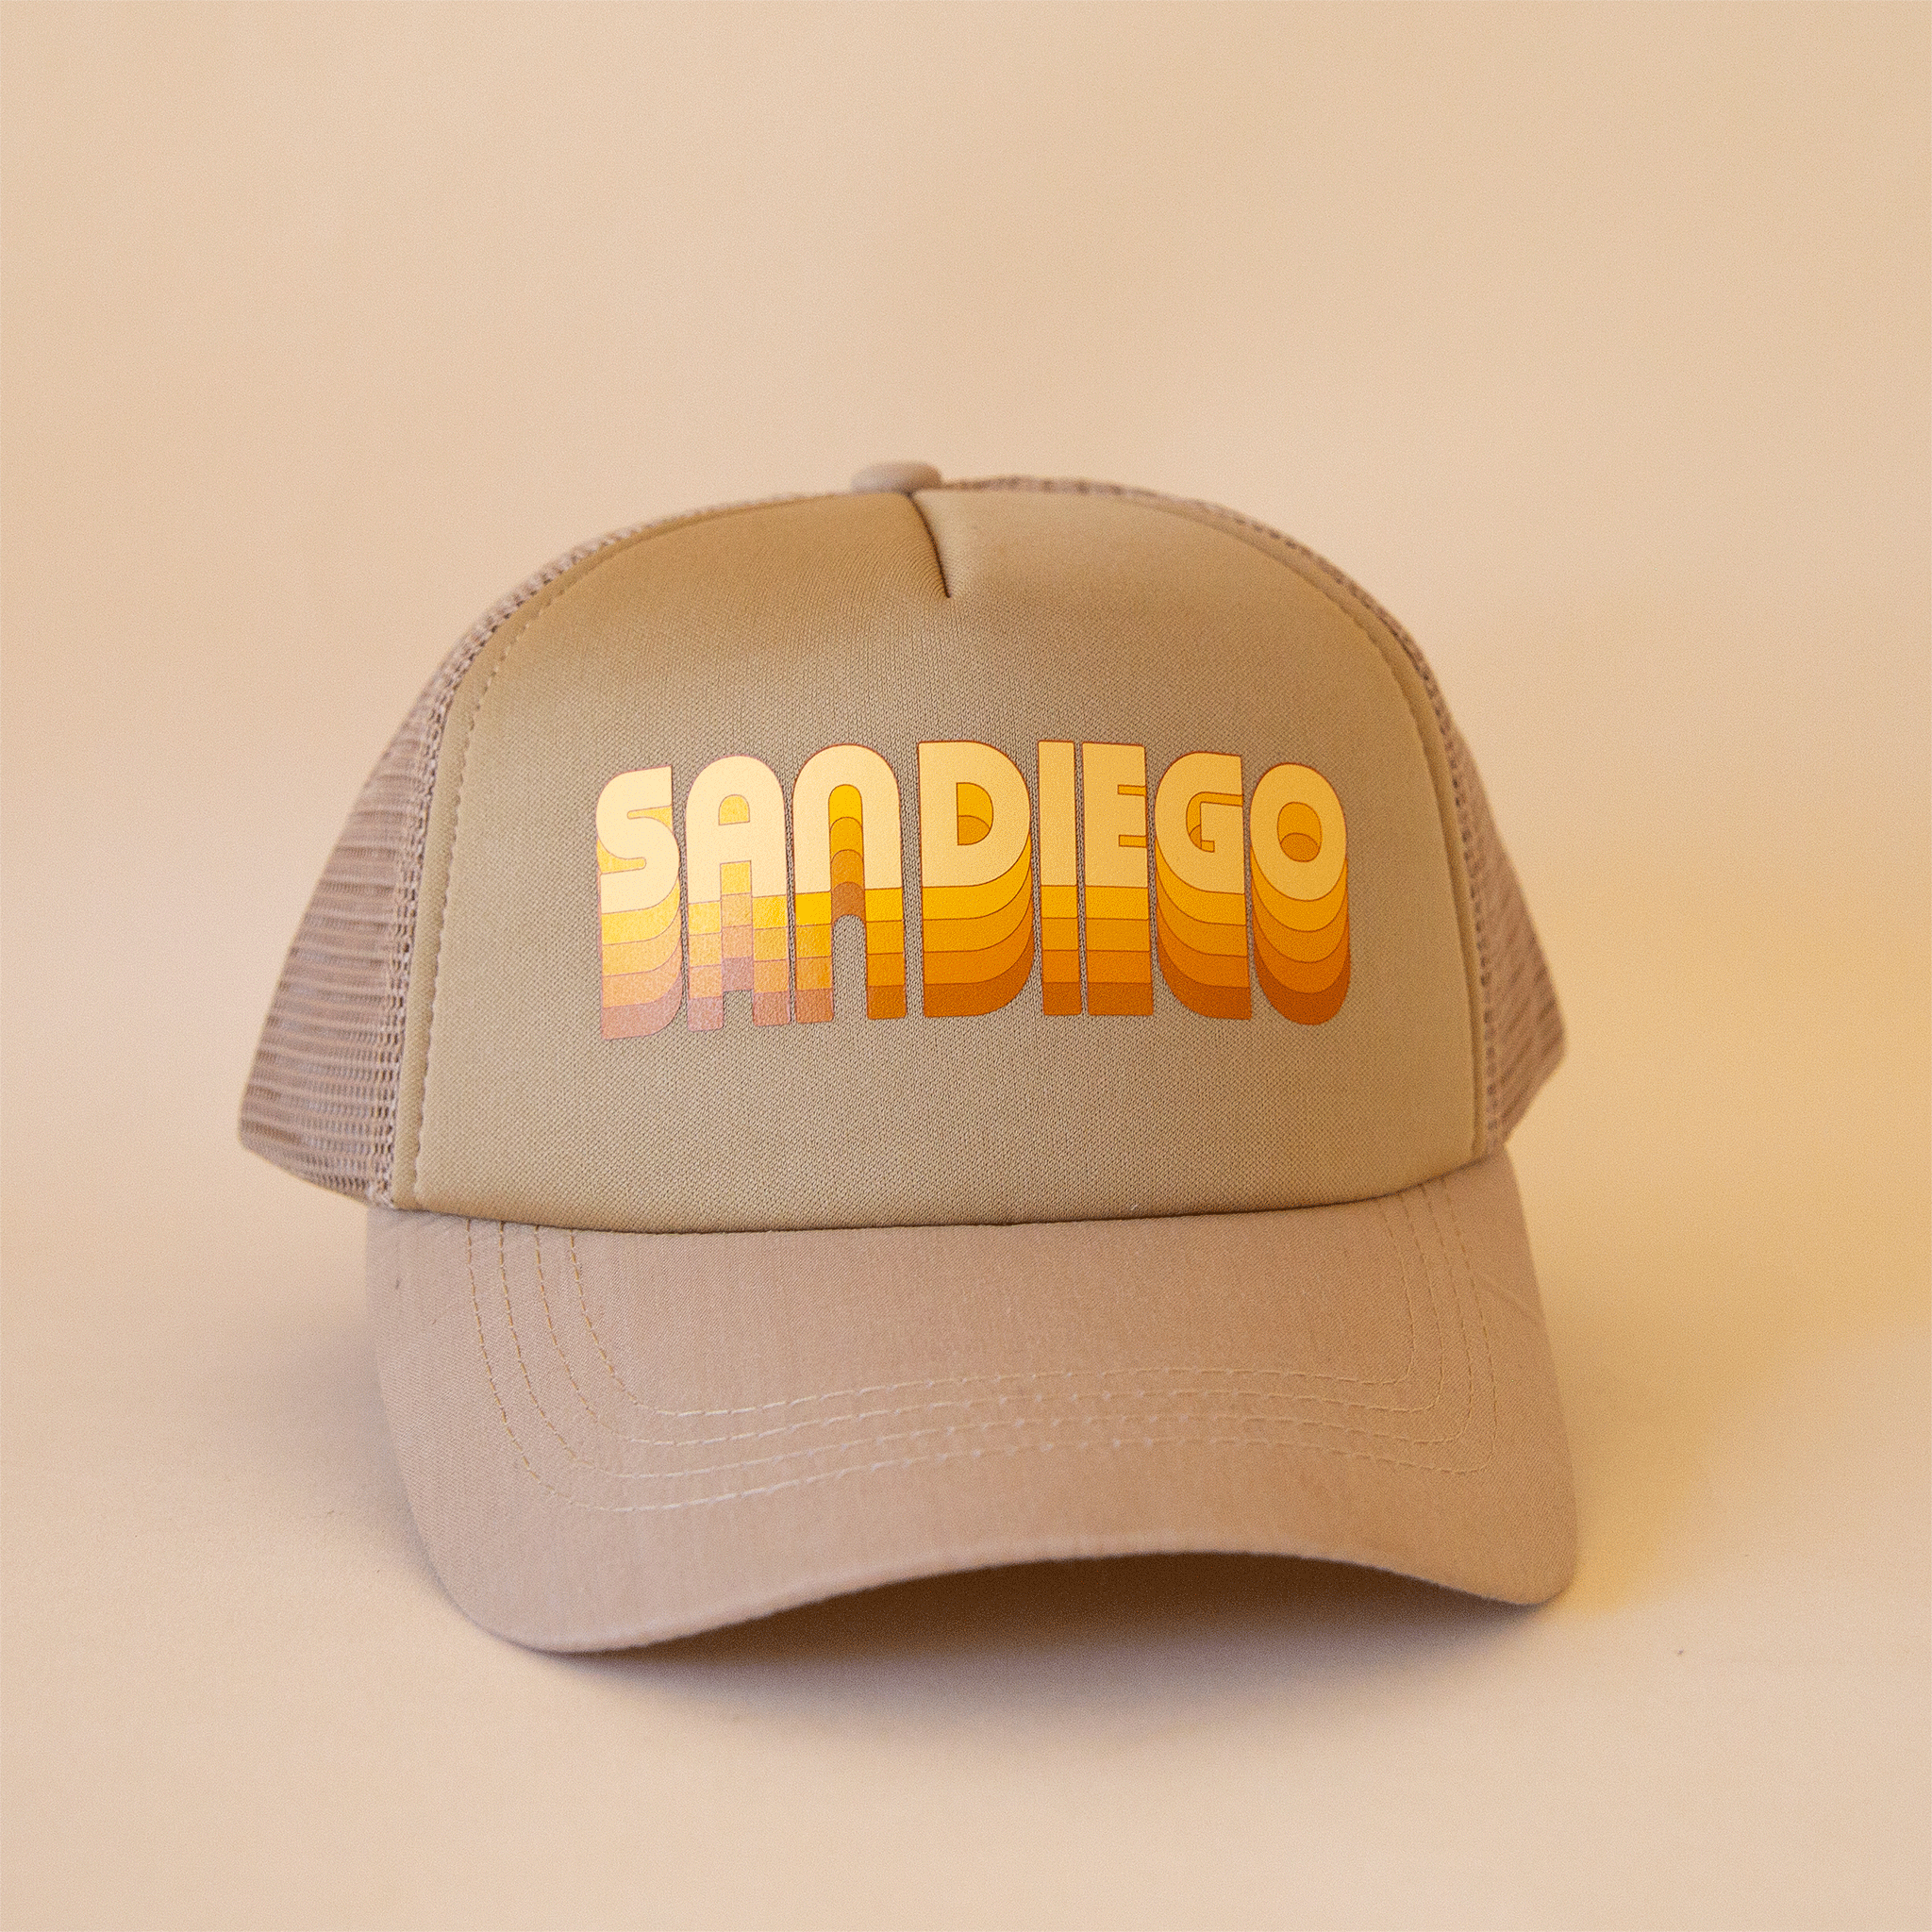 On a tan background is a tan trucker hat with yellow and orange gradient text that reads, "San Diego".